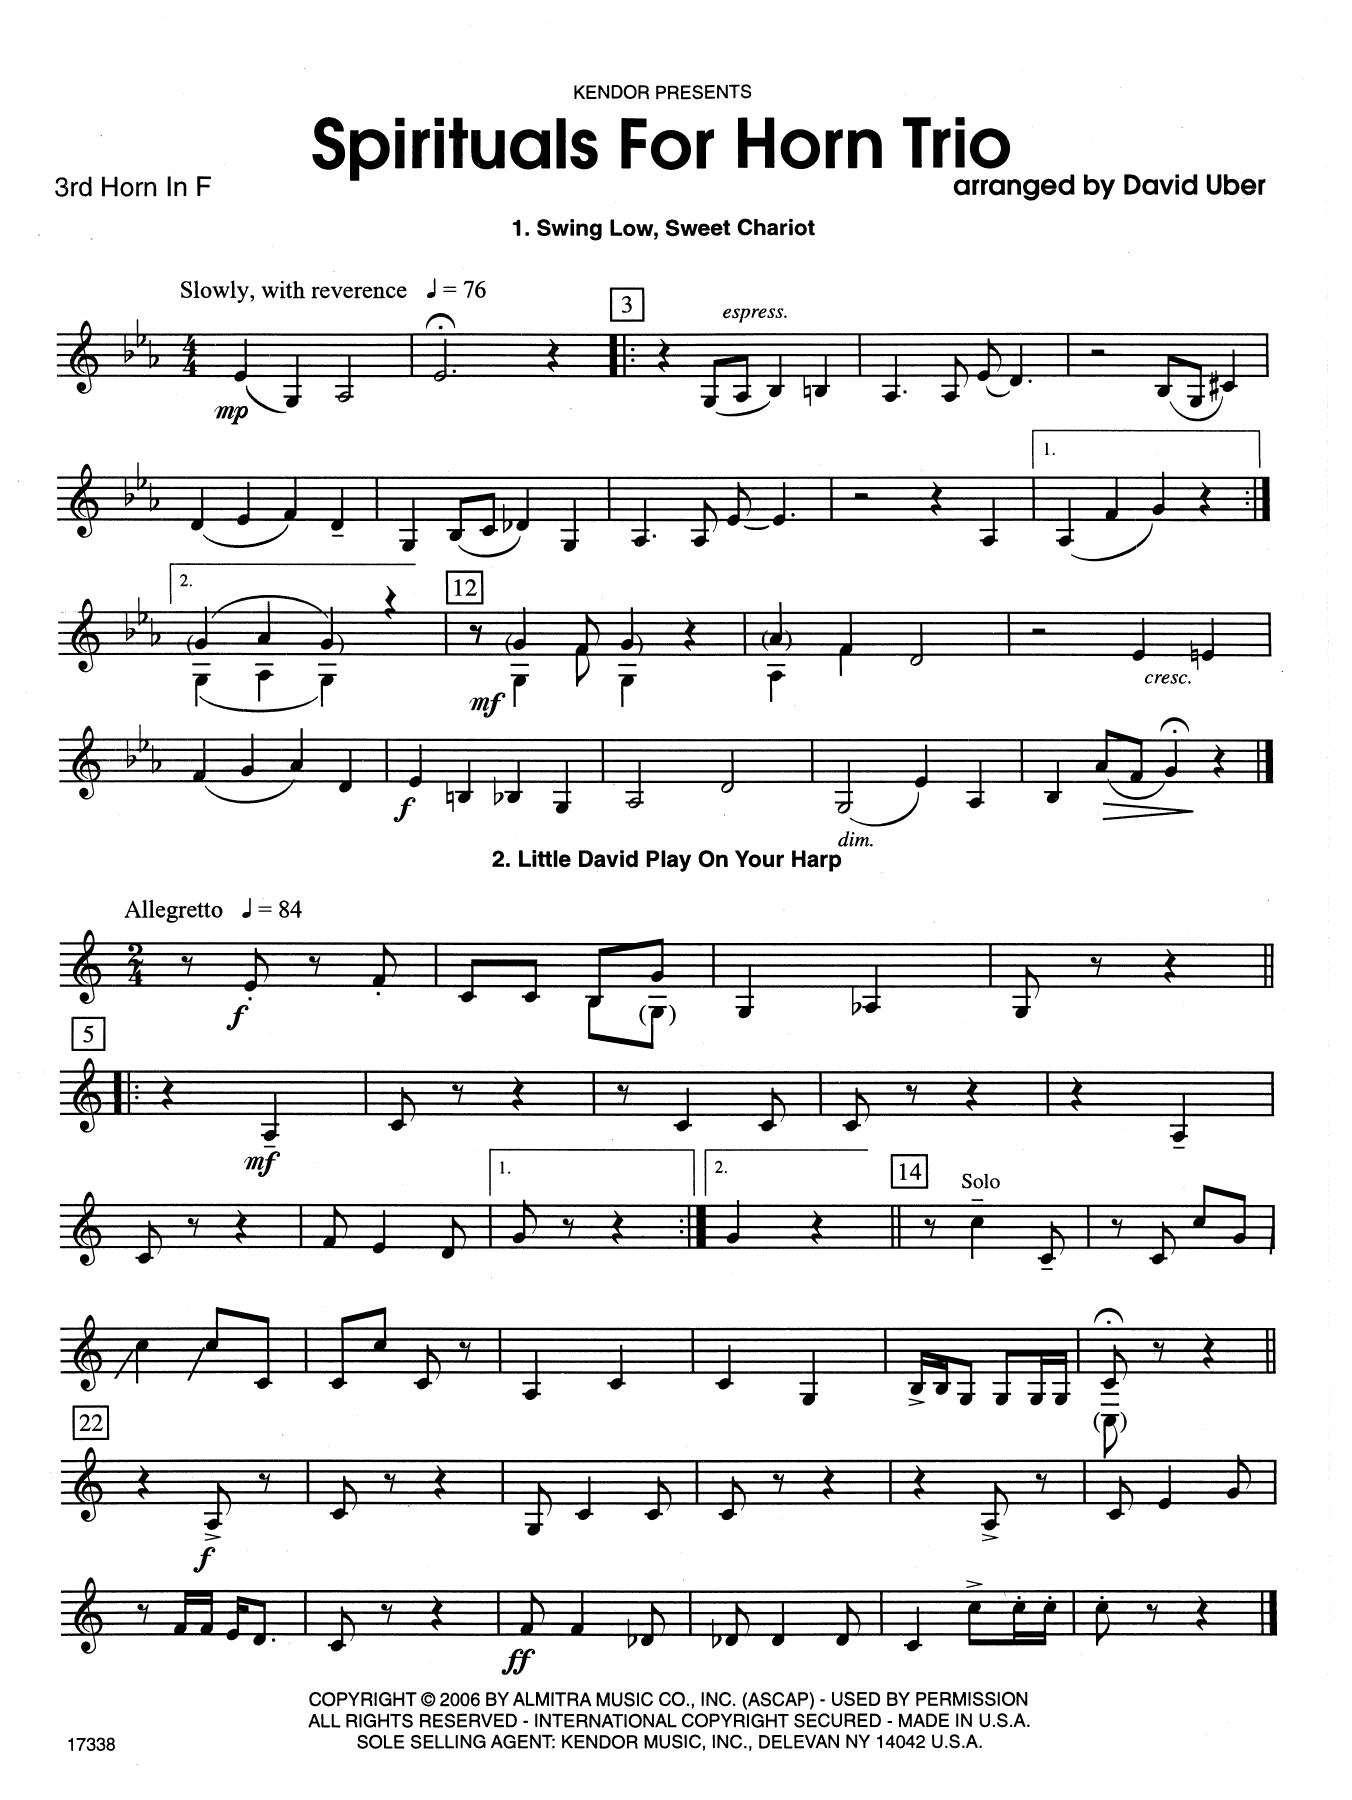 David Uber Spirituals For Horn Trio - 3rd Horn in F sheet music notes and chords. Download Printable PDF.